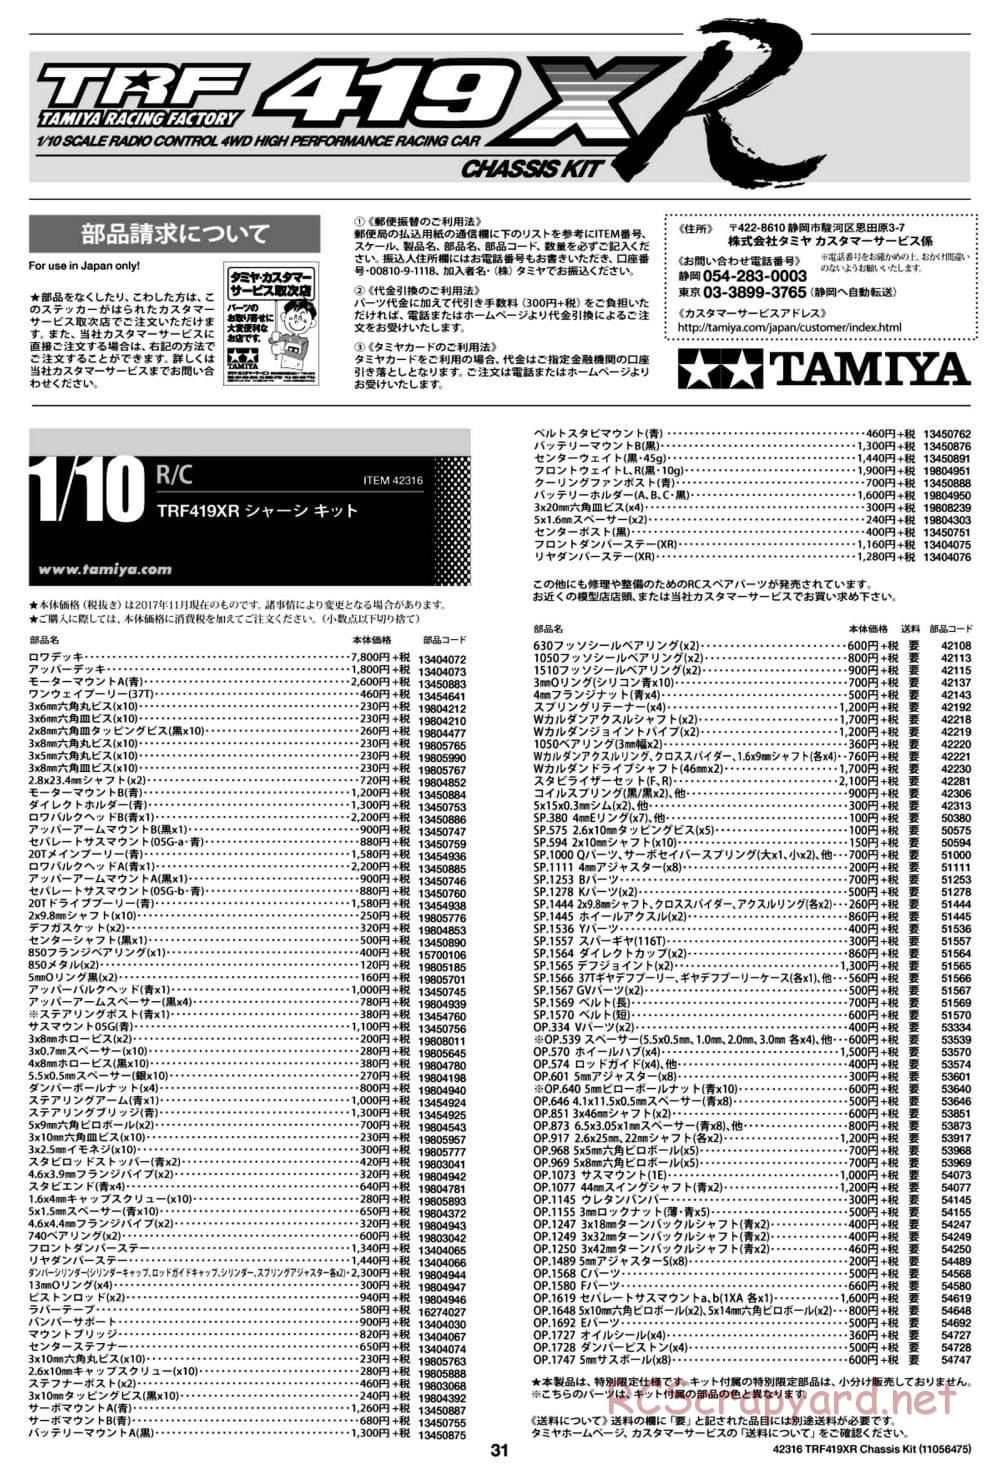 Tamiya - TRF419XR Chassis - Manual - Page 31